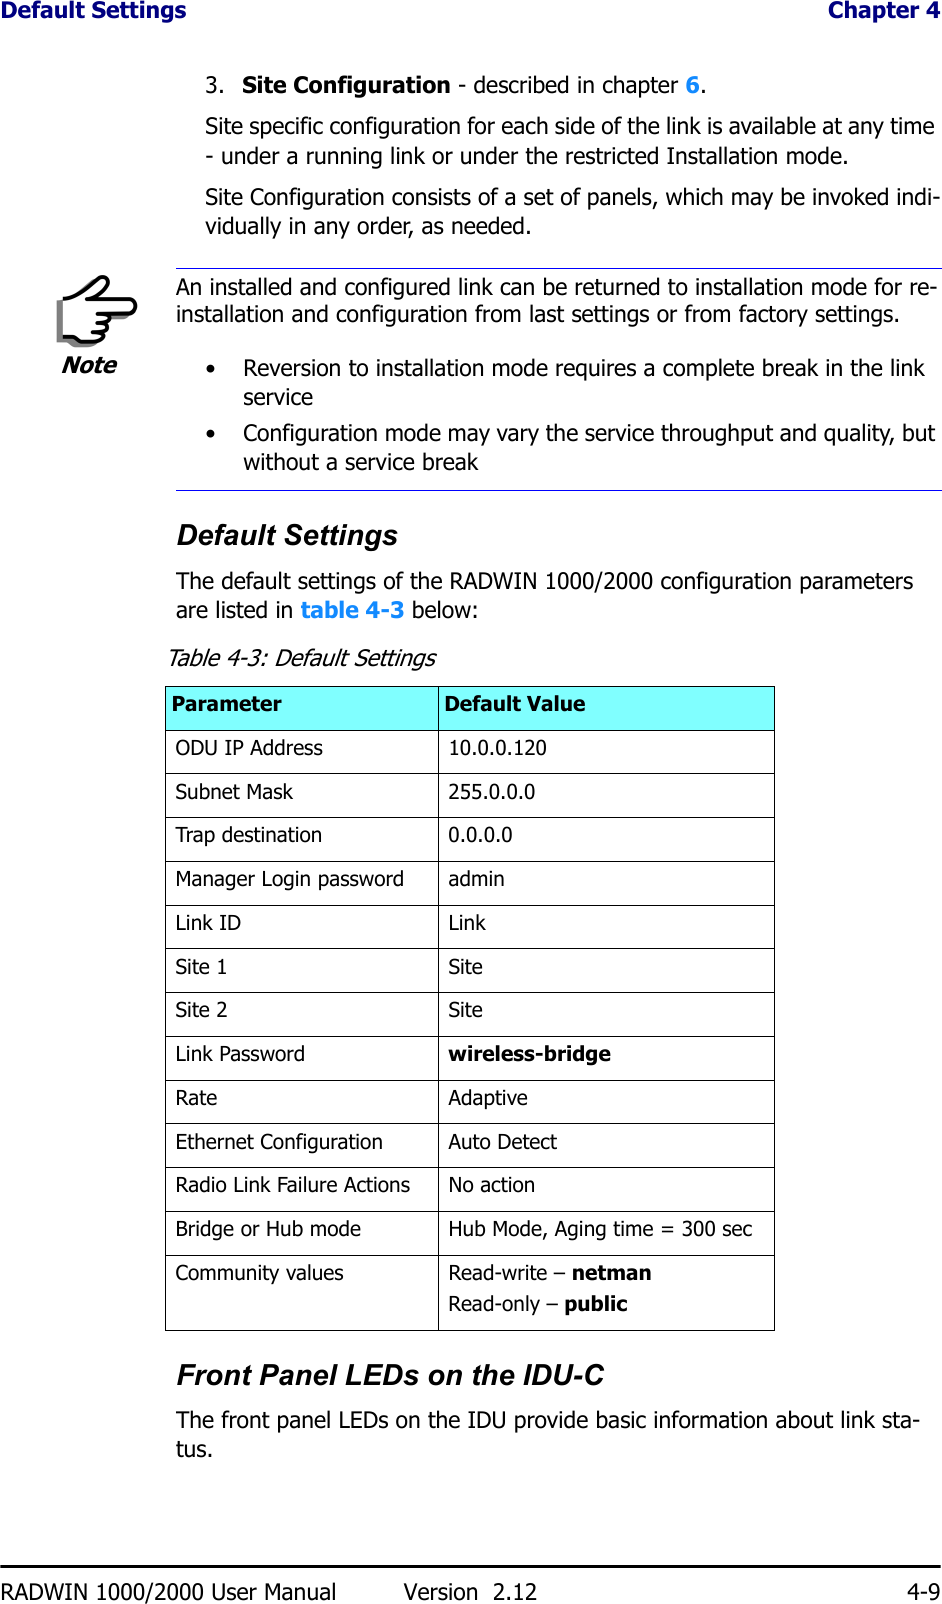 Default Settings  Chapter 4RADWIN 1000/2000 User Manual Version  2.12 4-93.  Site Configuration - described in chapter 6.Site specific configuration for each side of the link is available at any time - under a running link or under the restricted Installation mode.Site Configuration consists of a set of panels, which may be invoked indi-vidually in any order, as needed.Default SettingsThe default settings of the RADWIN 1000/2000 configuration parameters are listed in table 4-3 below:Front Panel LEDs on the IDU-CThe front panel LEDs on the IDU provide basic information about link sta-tus. NoteAn installed and configured link can be returned to installation mode for re-installation and configuration from last settings or from factory settings.• Reversion to installation mode requires a complete break in the link service• Configuration mode may vary the service throughput and quality, but without a service breakTable 4-3: Default SettingsParameter Default ValueODU IP Address 10.0.0.120Subnet Mask 255.0.0.0Trap destination 0.0.0.0Manager Login password adminLink ID Link Site 1 SiteSite 2 SiteLink Password wireless-bridgeRate AdaptiveEthernet Configuration Auto DetectRadio Link Failure Actions No actionBridge or Hub mode Hub Mode, Aging time = 300 secCommunity values Read-write – netmanRead-only – public